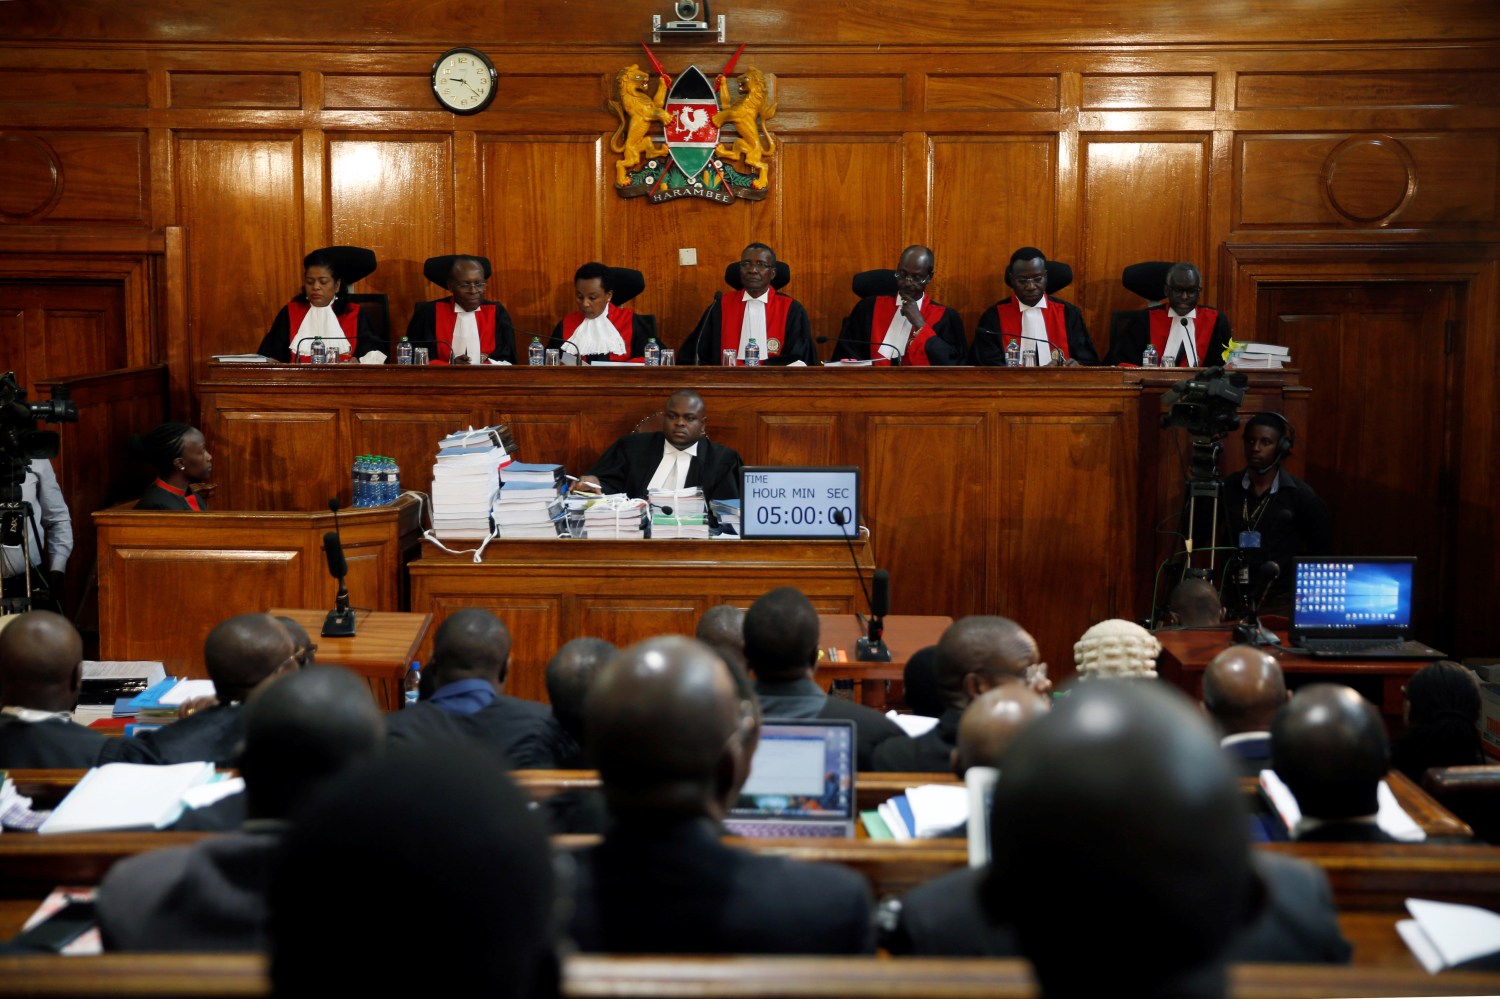 Kenyan Supreme Court judges attend a hearing of a petition challenging the election result  filed by the National Super Alliance (NASA) coalition and Human Rights groups at the Supreme Court in Nairobi, Kenya August 28, 2017. REUTERS/Baz Ratner